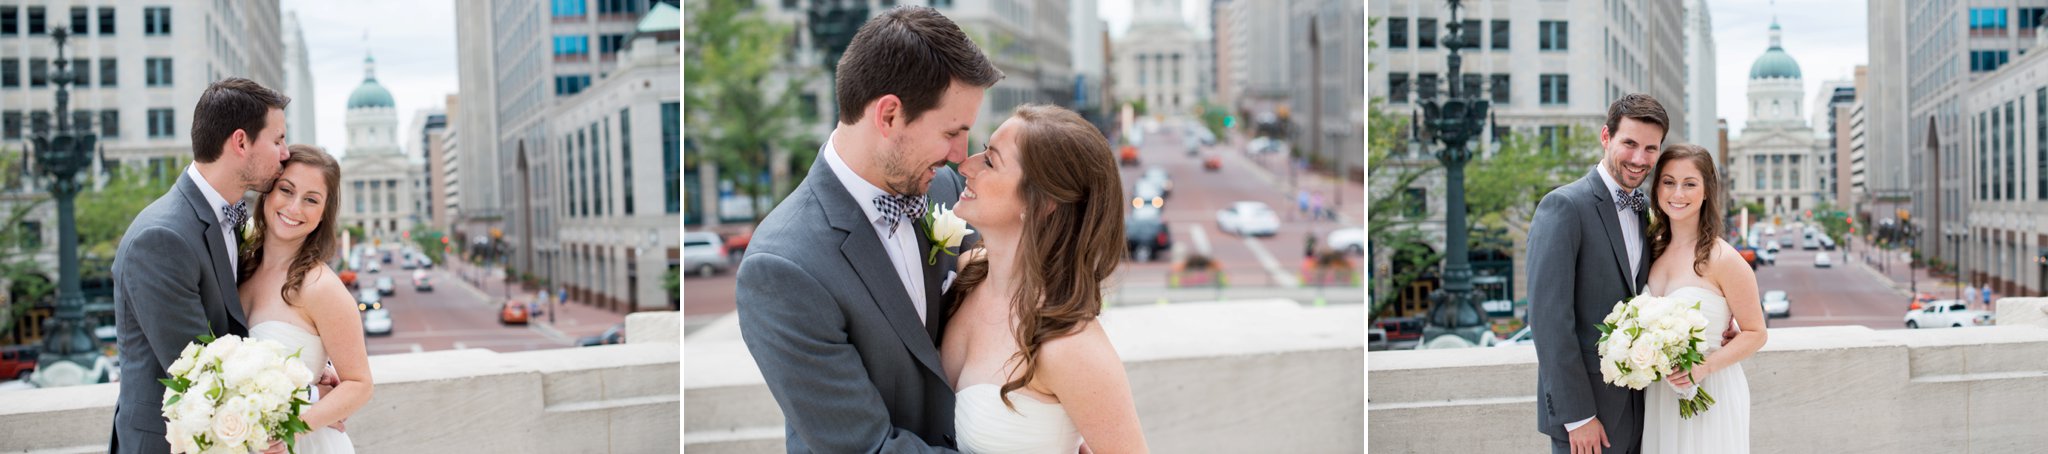 summer downtown Indianapolis wedding photography 